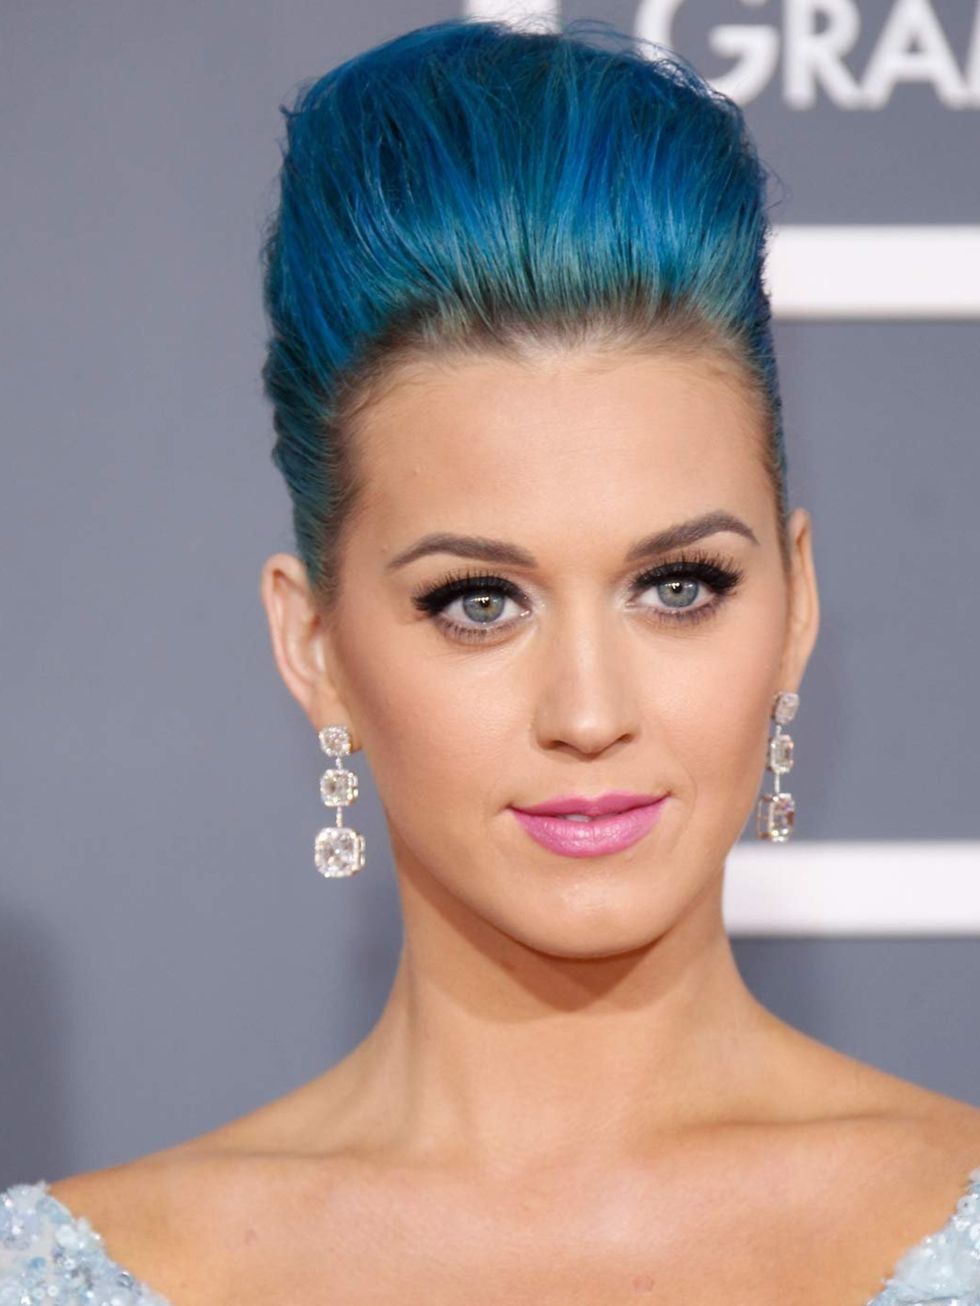 <p>Katy Perry wearing pink lipstick at the Grammy Awards 2012</p>